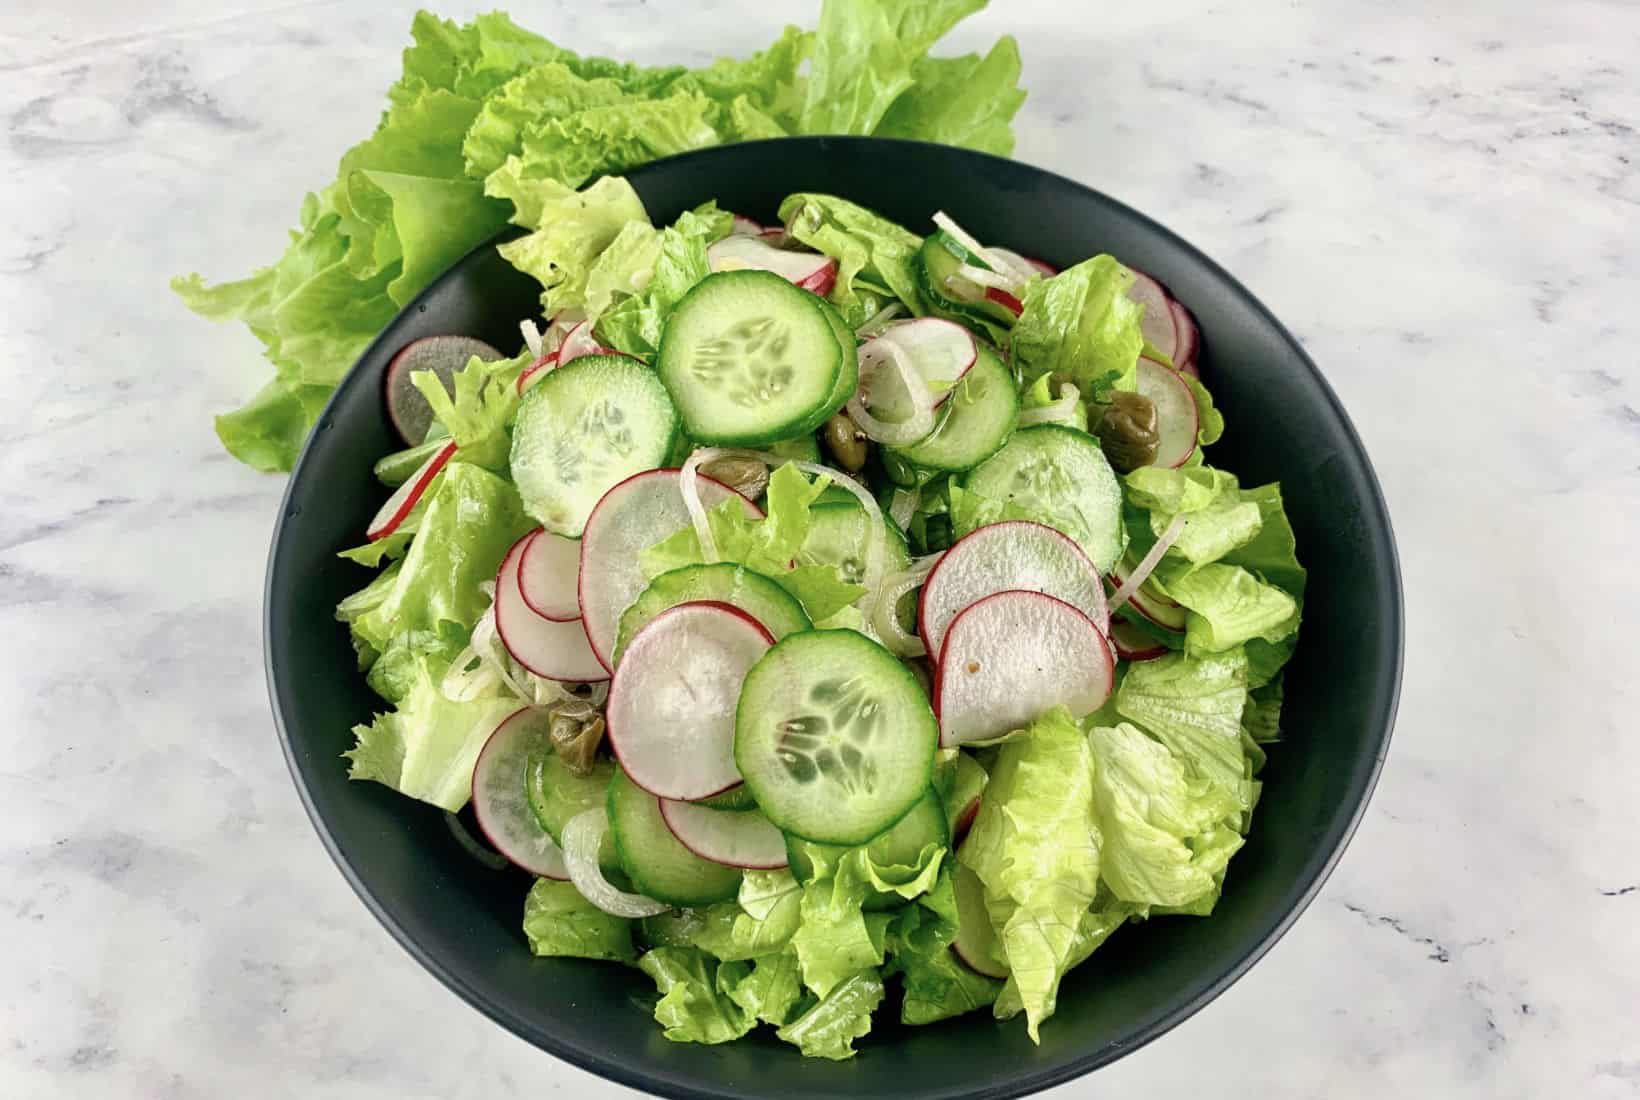 Salad with greens